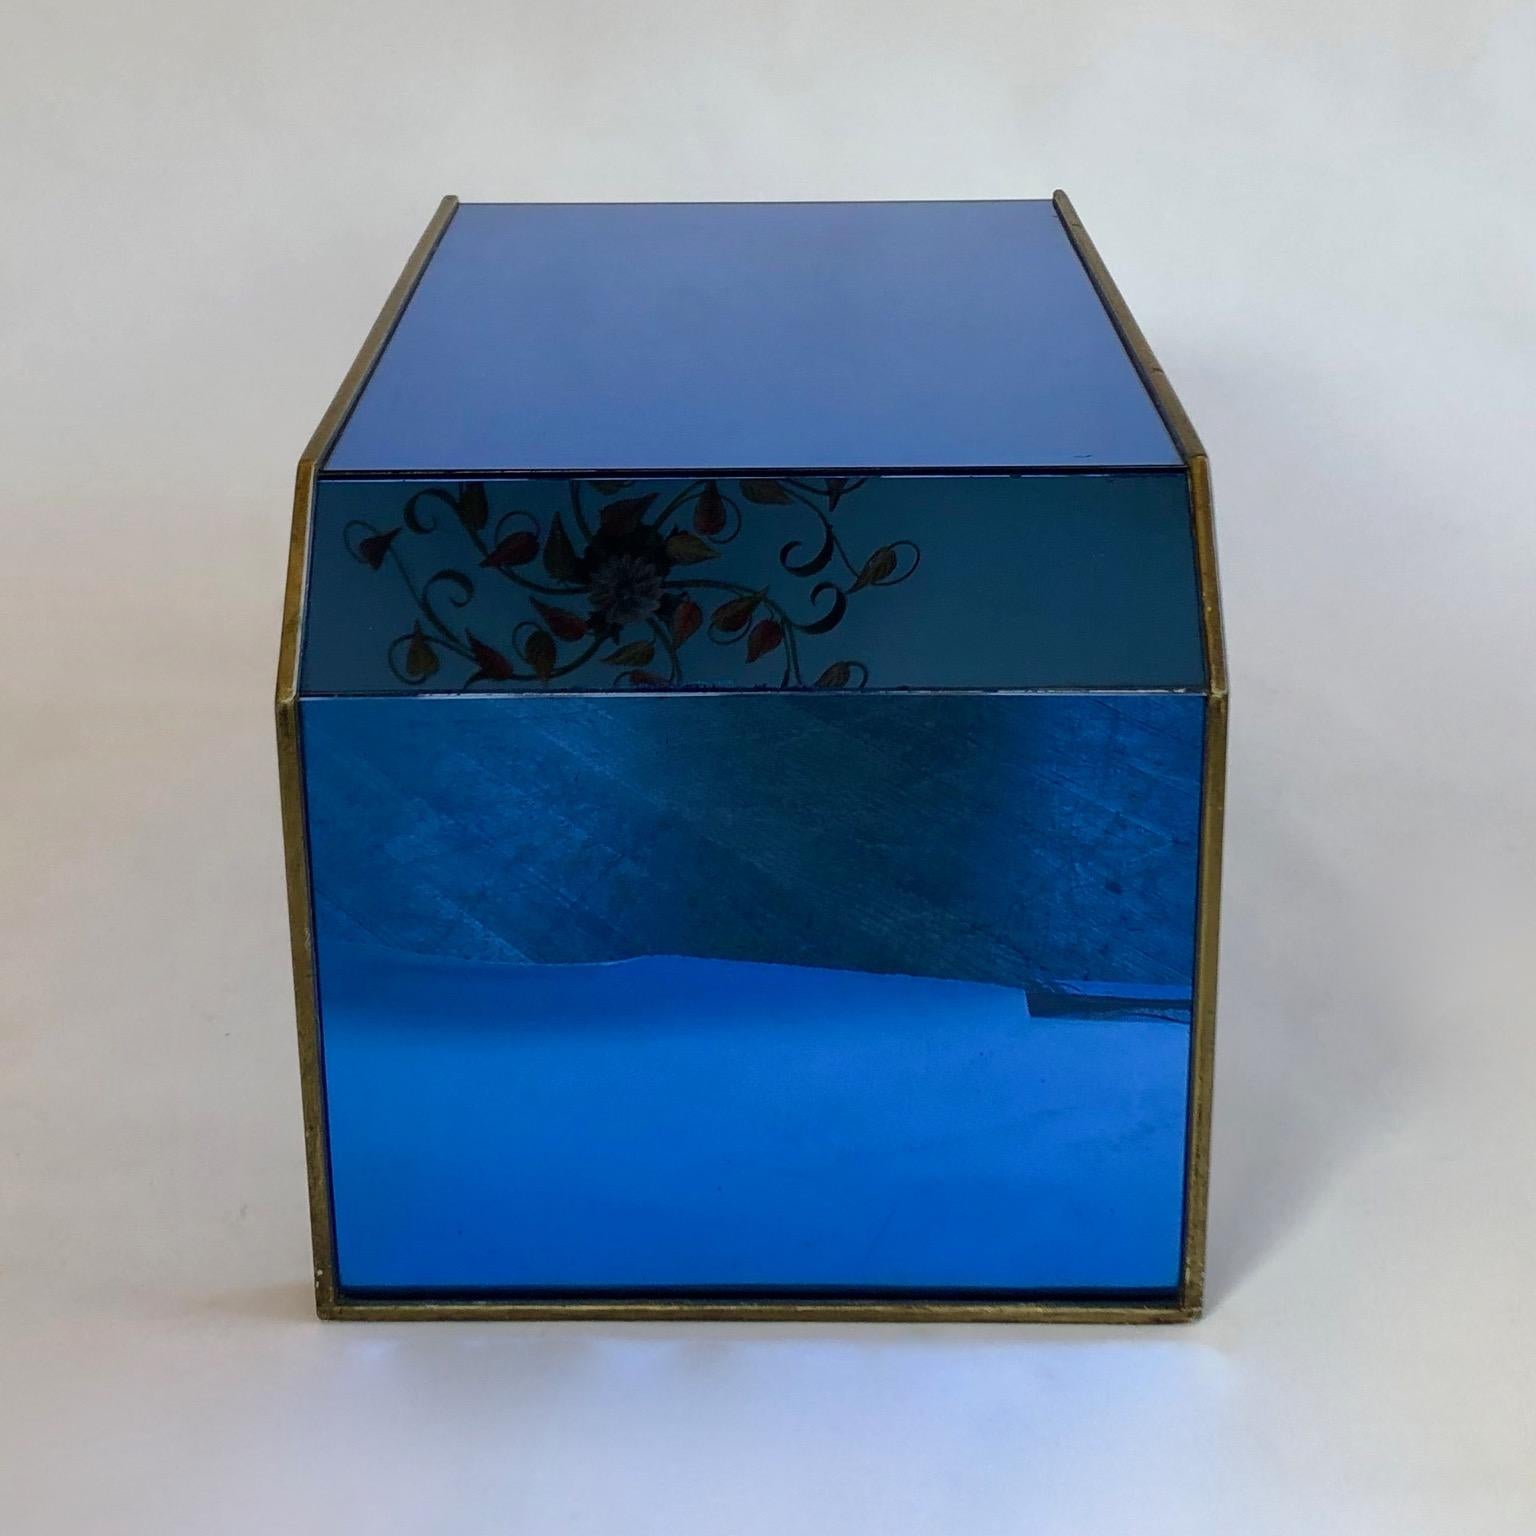 British Art Deco blue mirrored side table with giltwood surround, 1920's to 1950's, UK For Sale